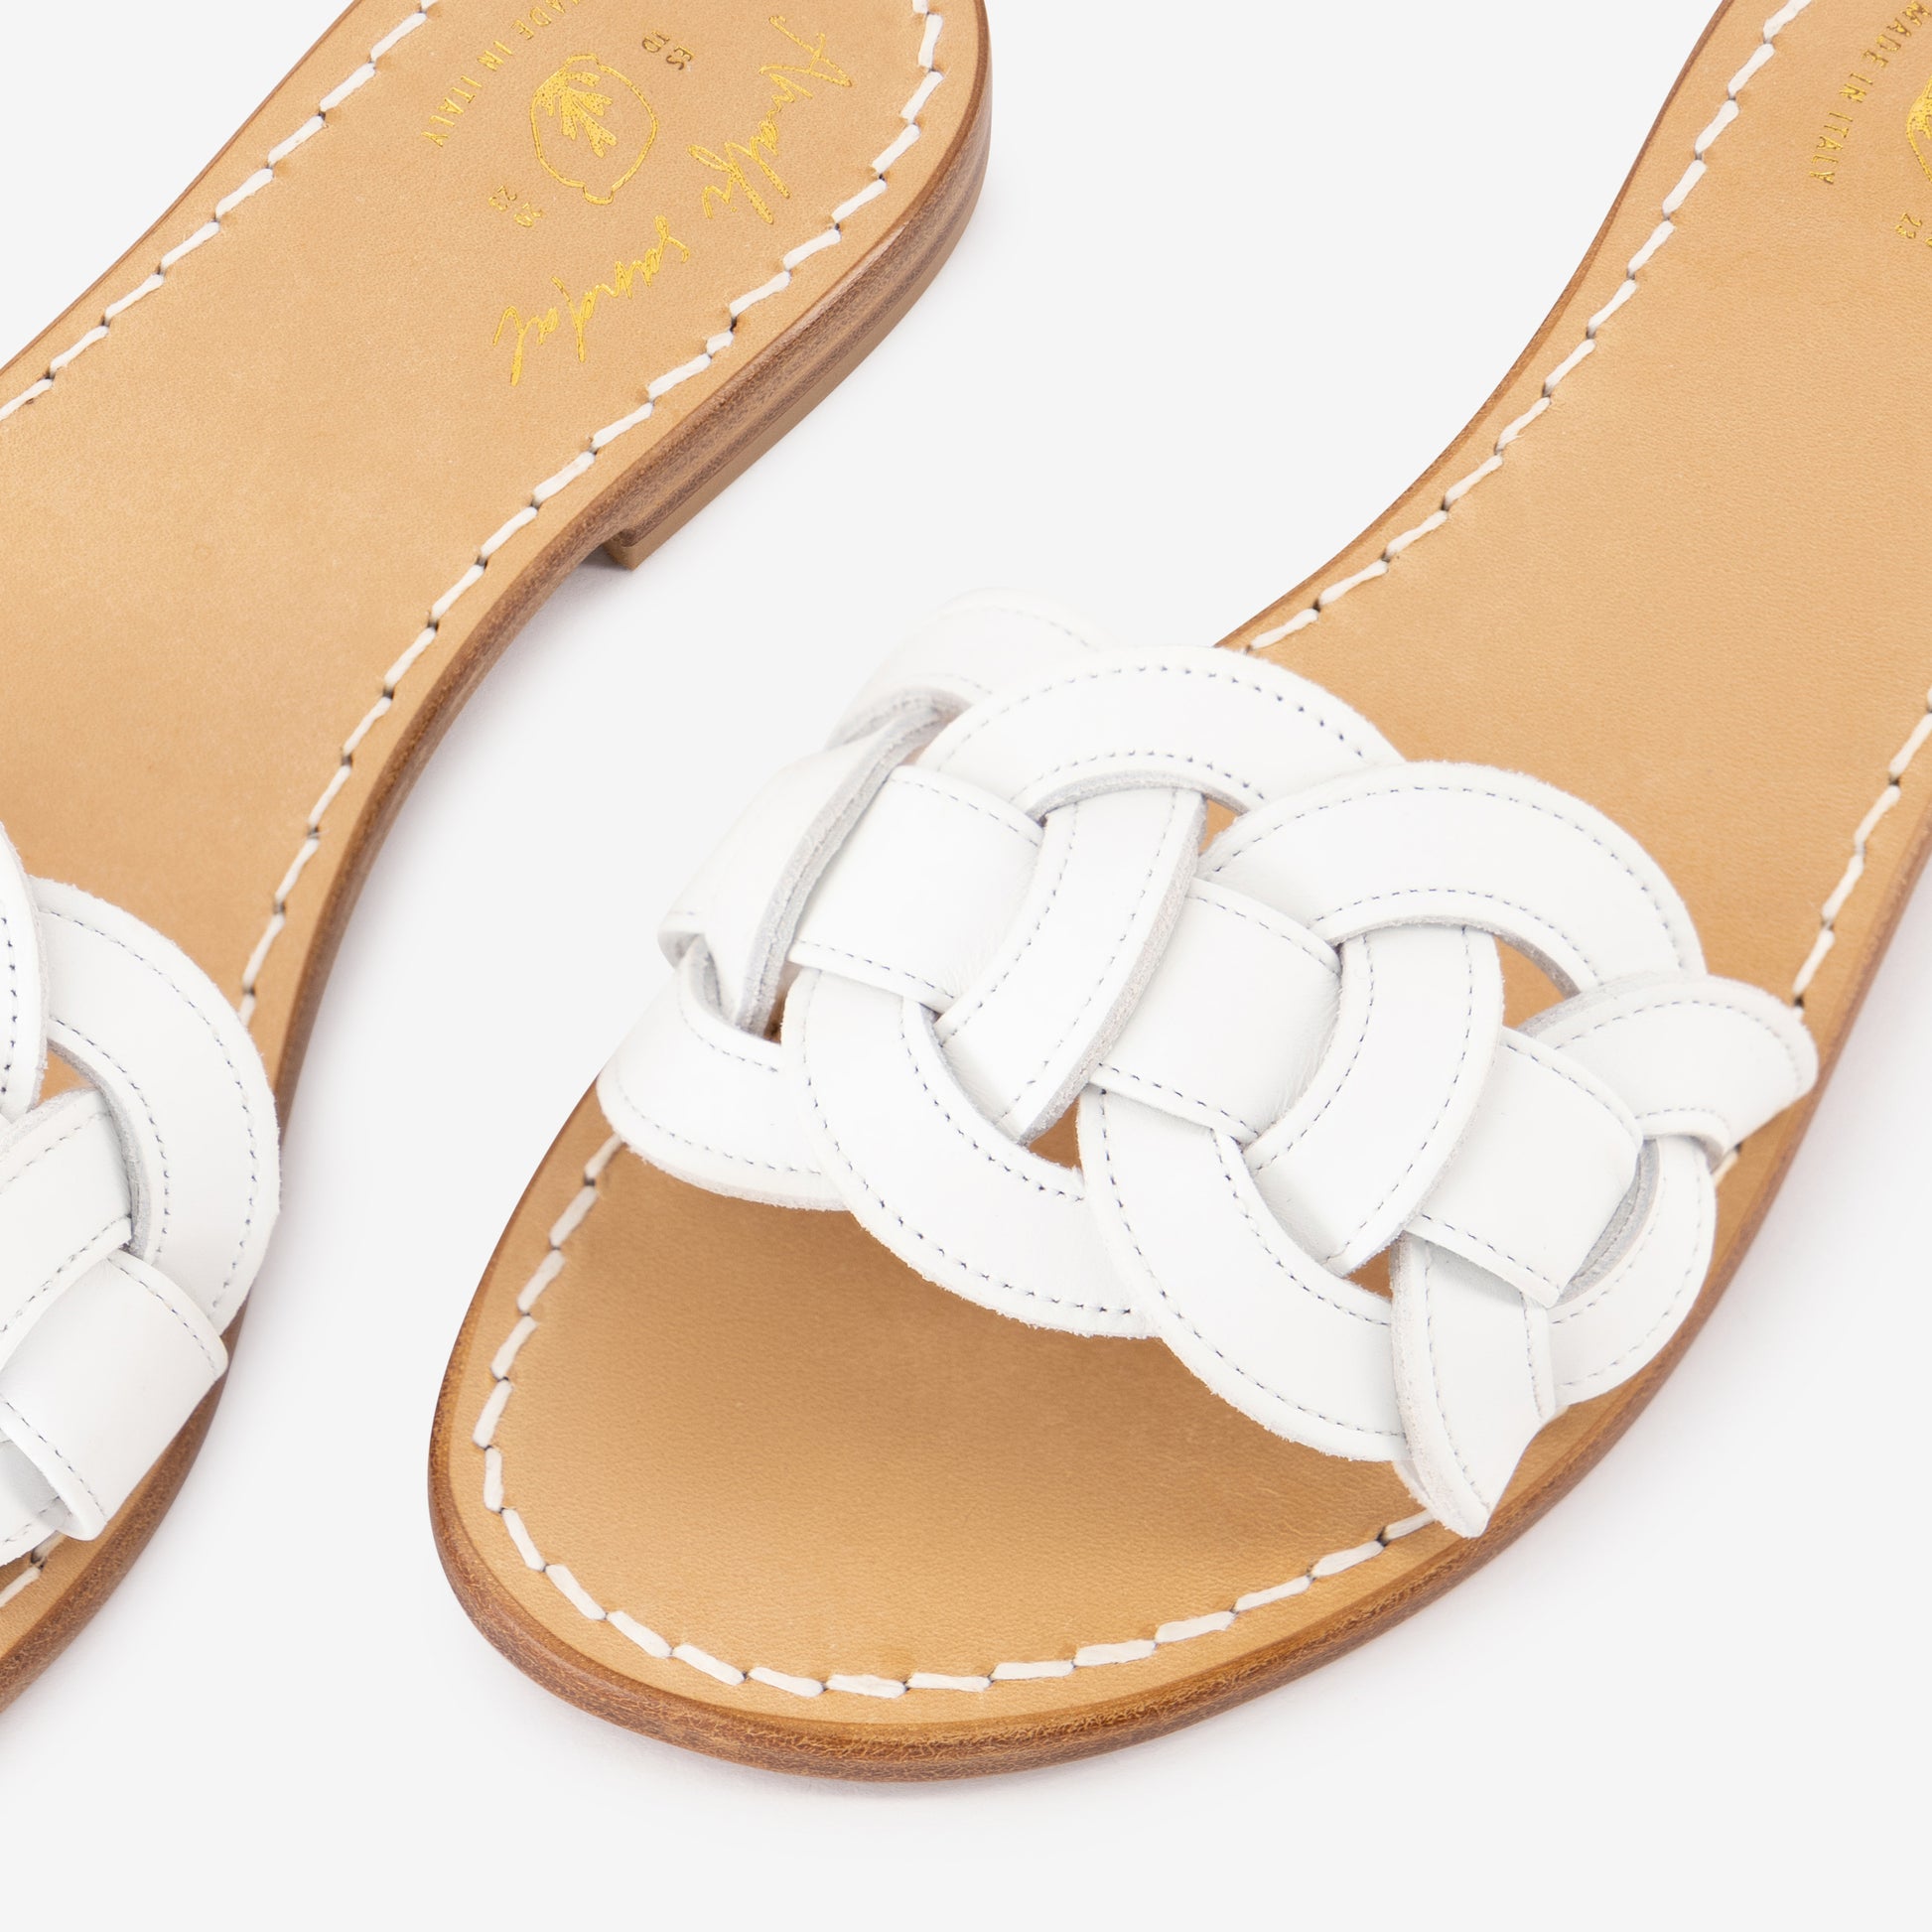 Amalafi Sandal "Nuvola" | Color White| Italian Leather Sandal | Handmade in Italy| The breathable insole, made of real leather, ensures maximum comfort for your feet, while the hand-stitched Italian leather uppers of first choice provide strength and durability. The interlocking straps are also hand-stitched with strong and durable cotton thread, ensuring that the sandal will last for years to come.